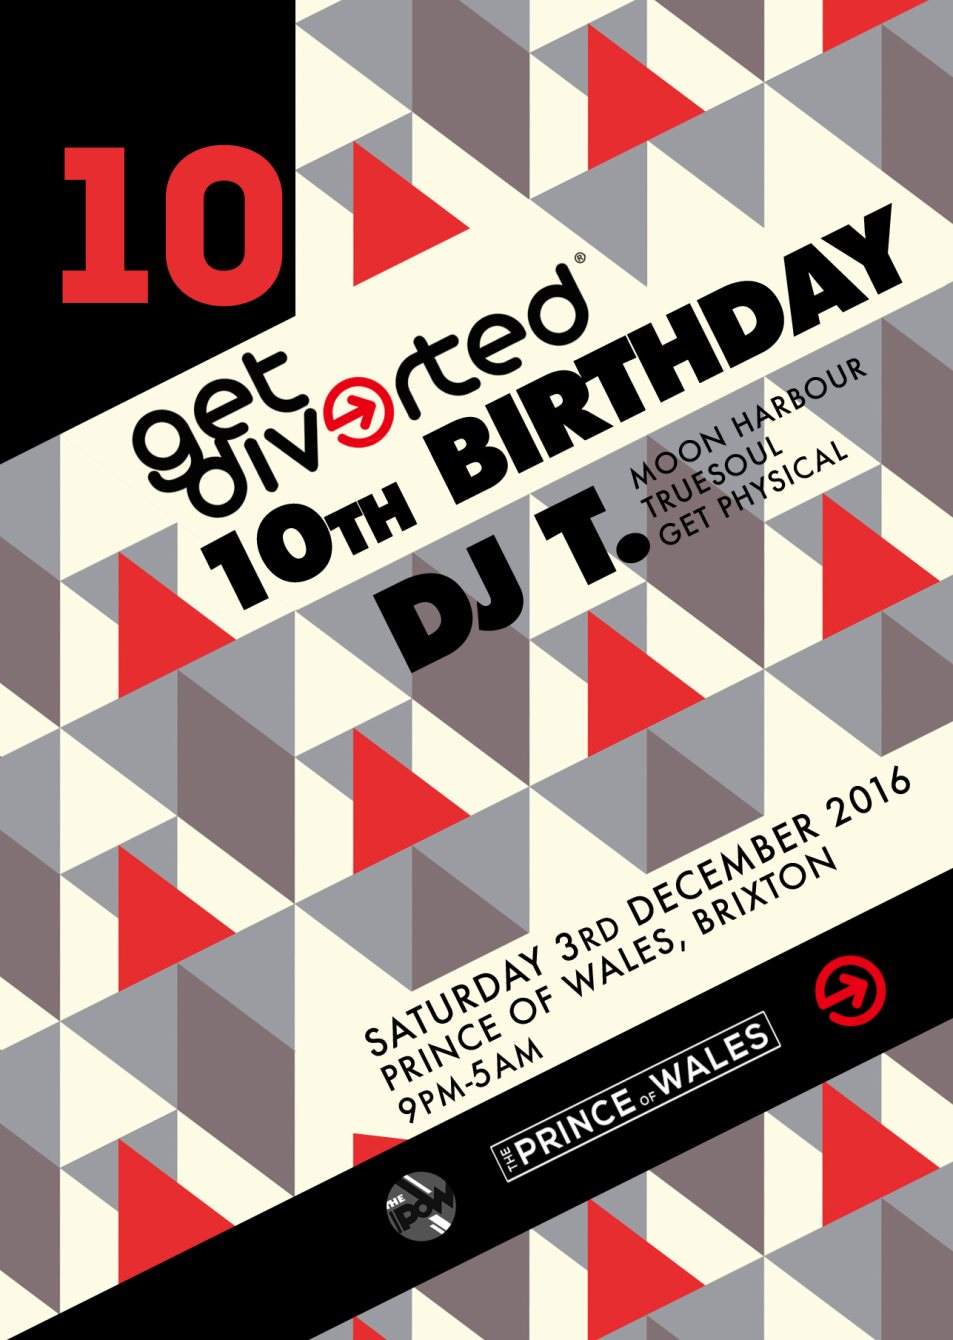 Get Diverted 10th Birthday with DJ T - Página frontal